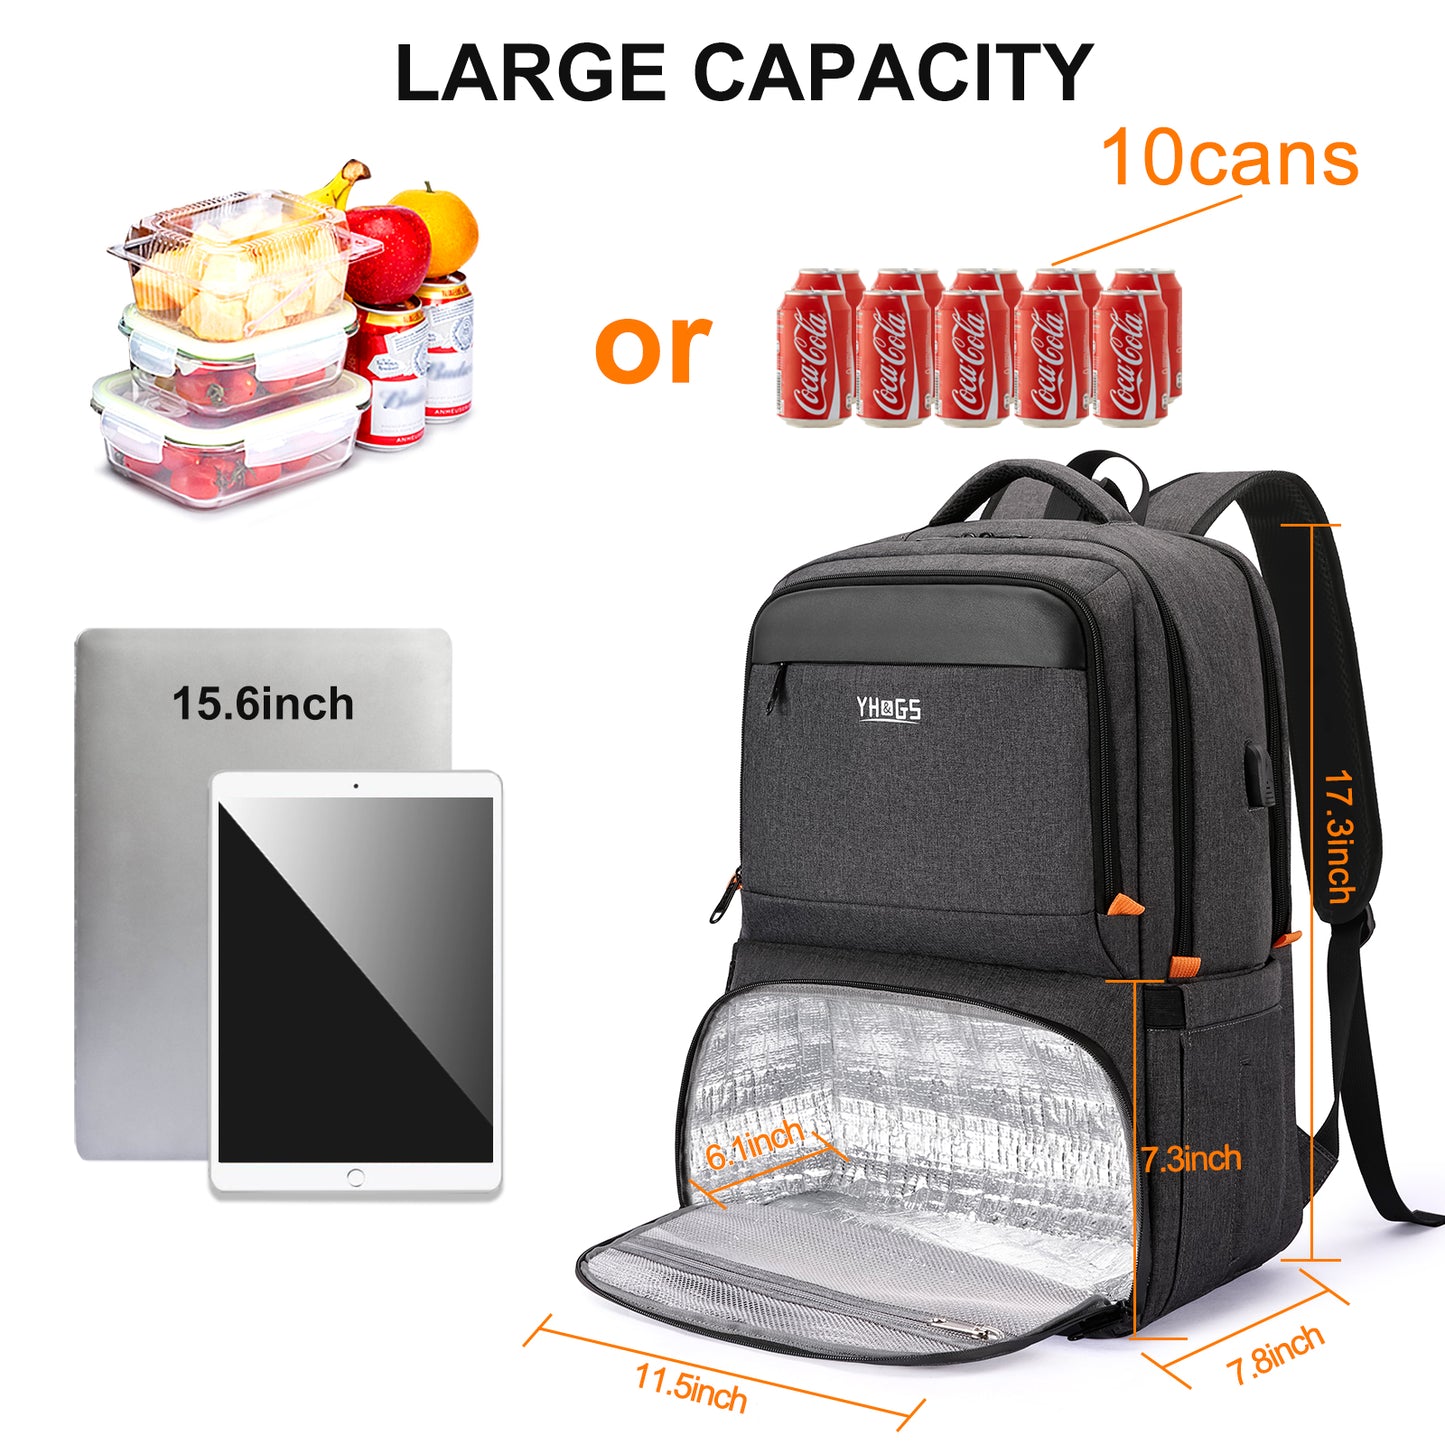 Lunch Backpack, Insulated Cooler Backpack Lunch Box for Men Women, 15.6 Inches RFID Blocking Laptop Backpack with USB Port, Water Resistant Leak-proof Lunch Bag for Work School Picnics Hiking Black